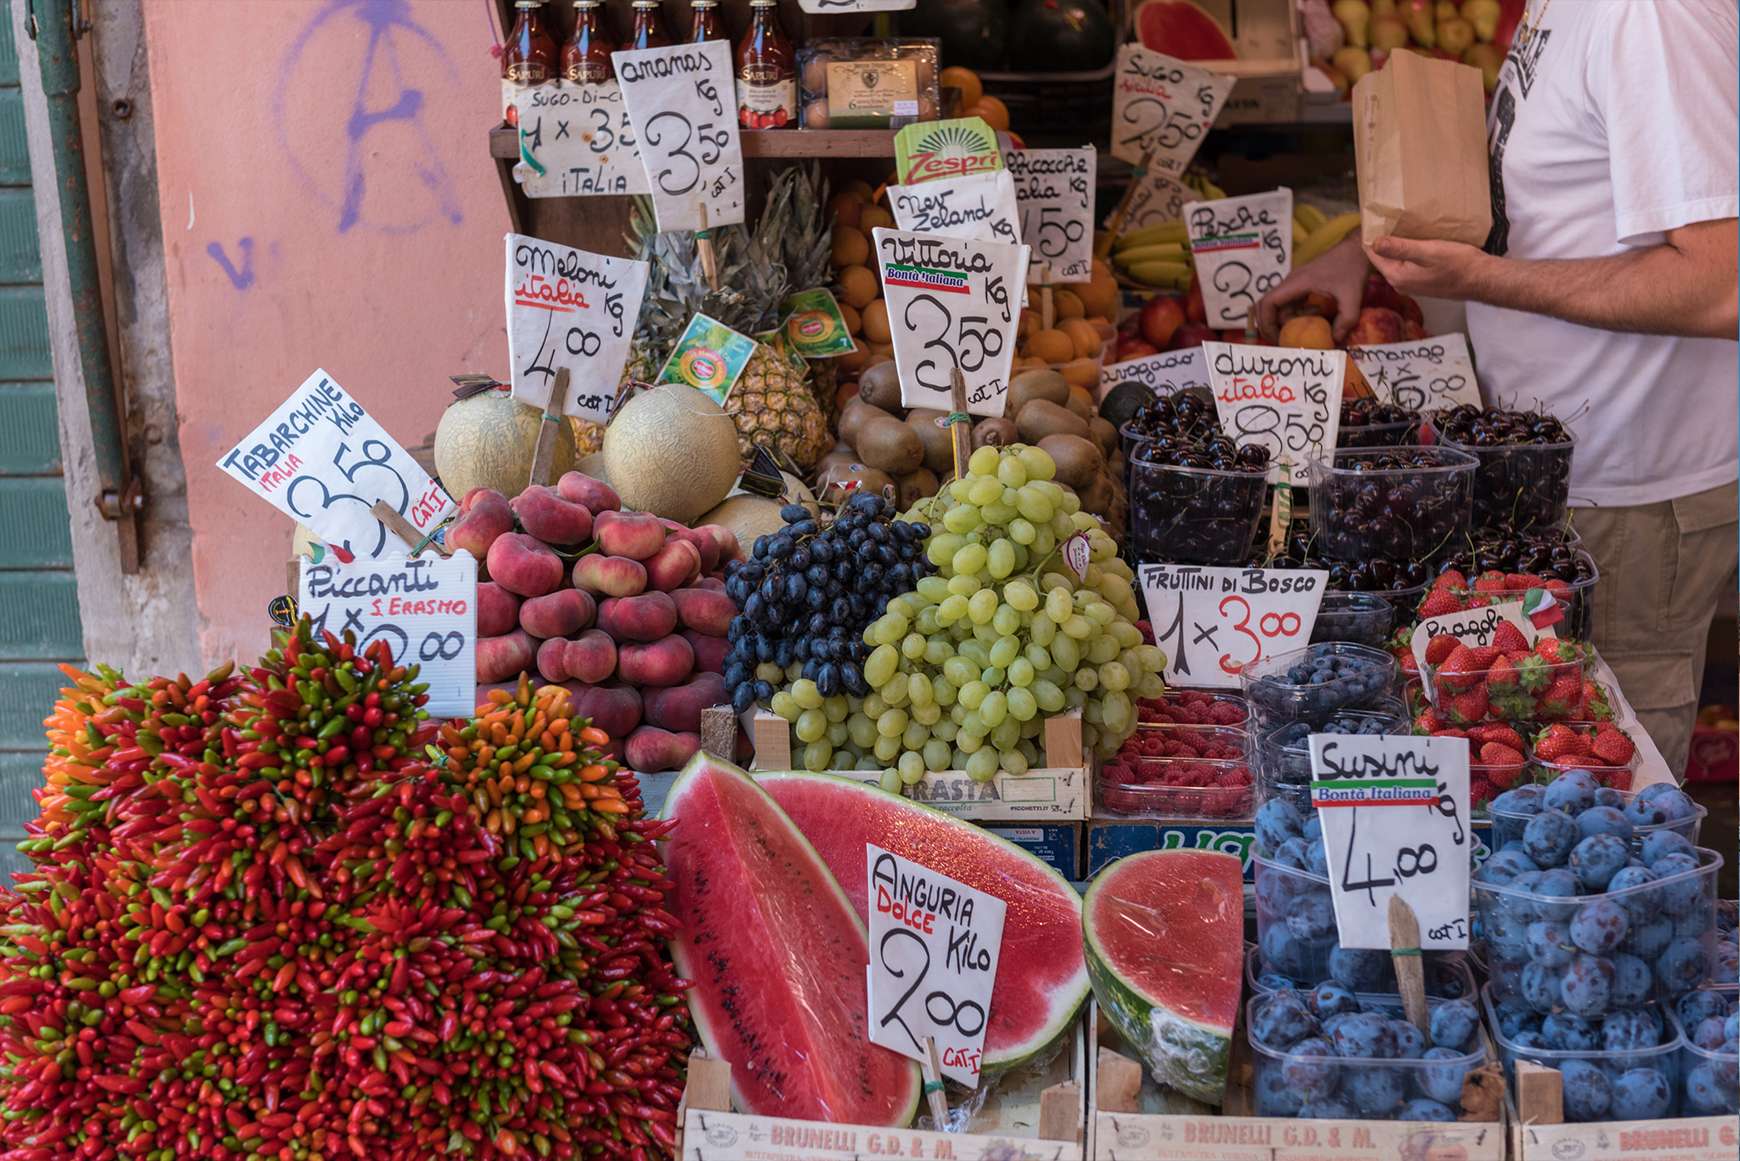 Display of fruits at an open-air market in Rome